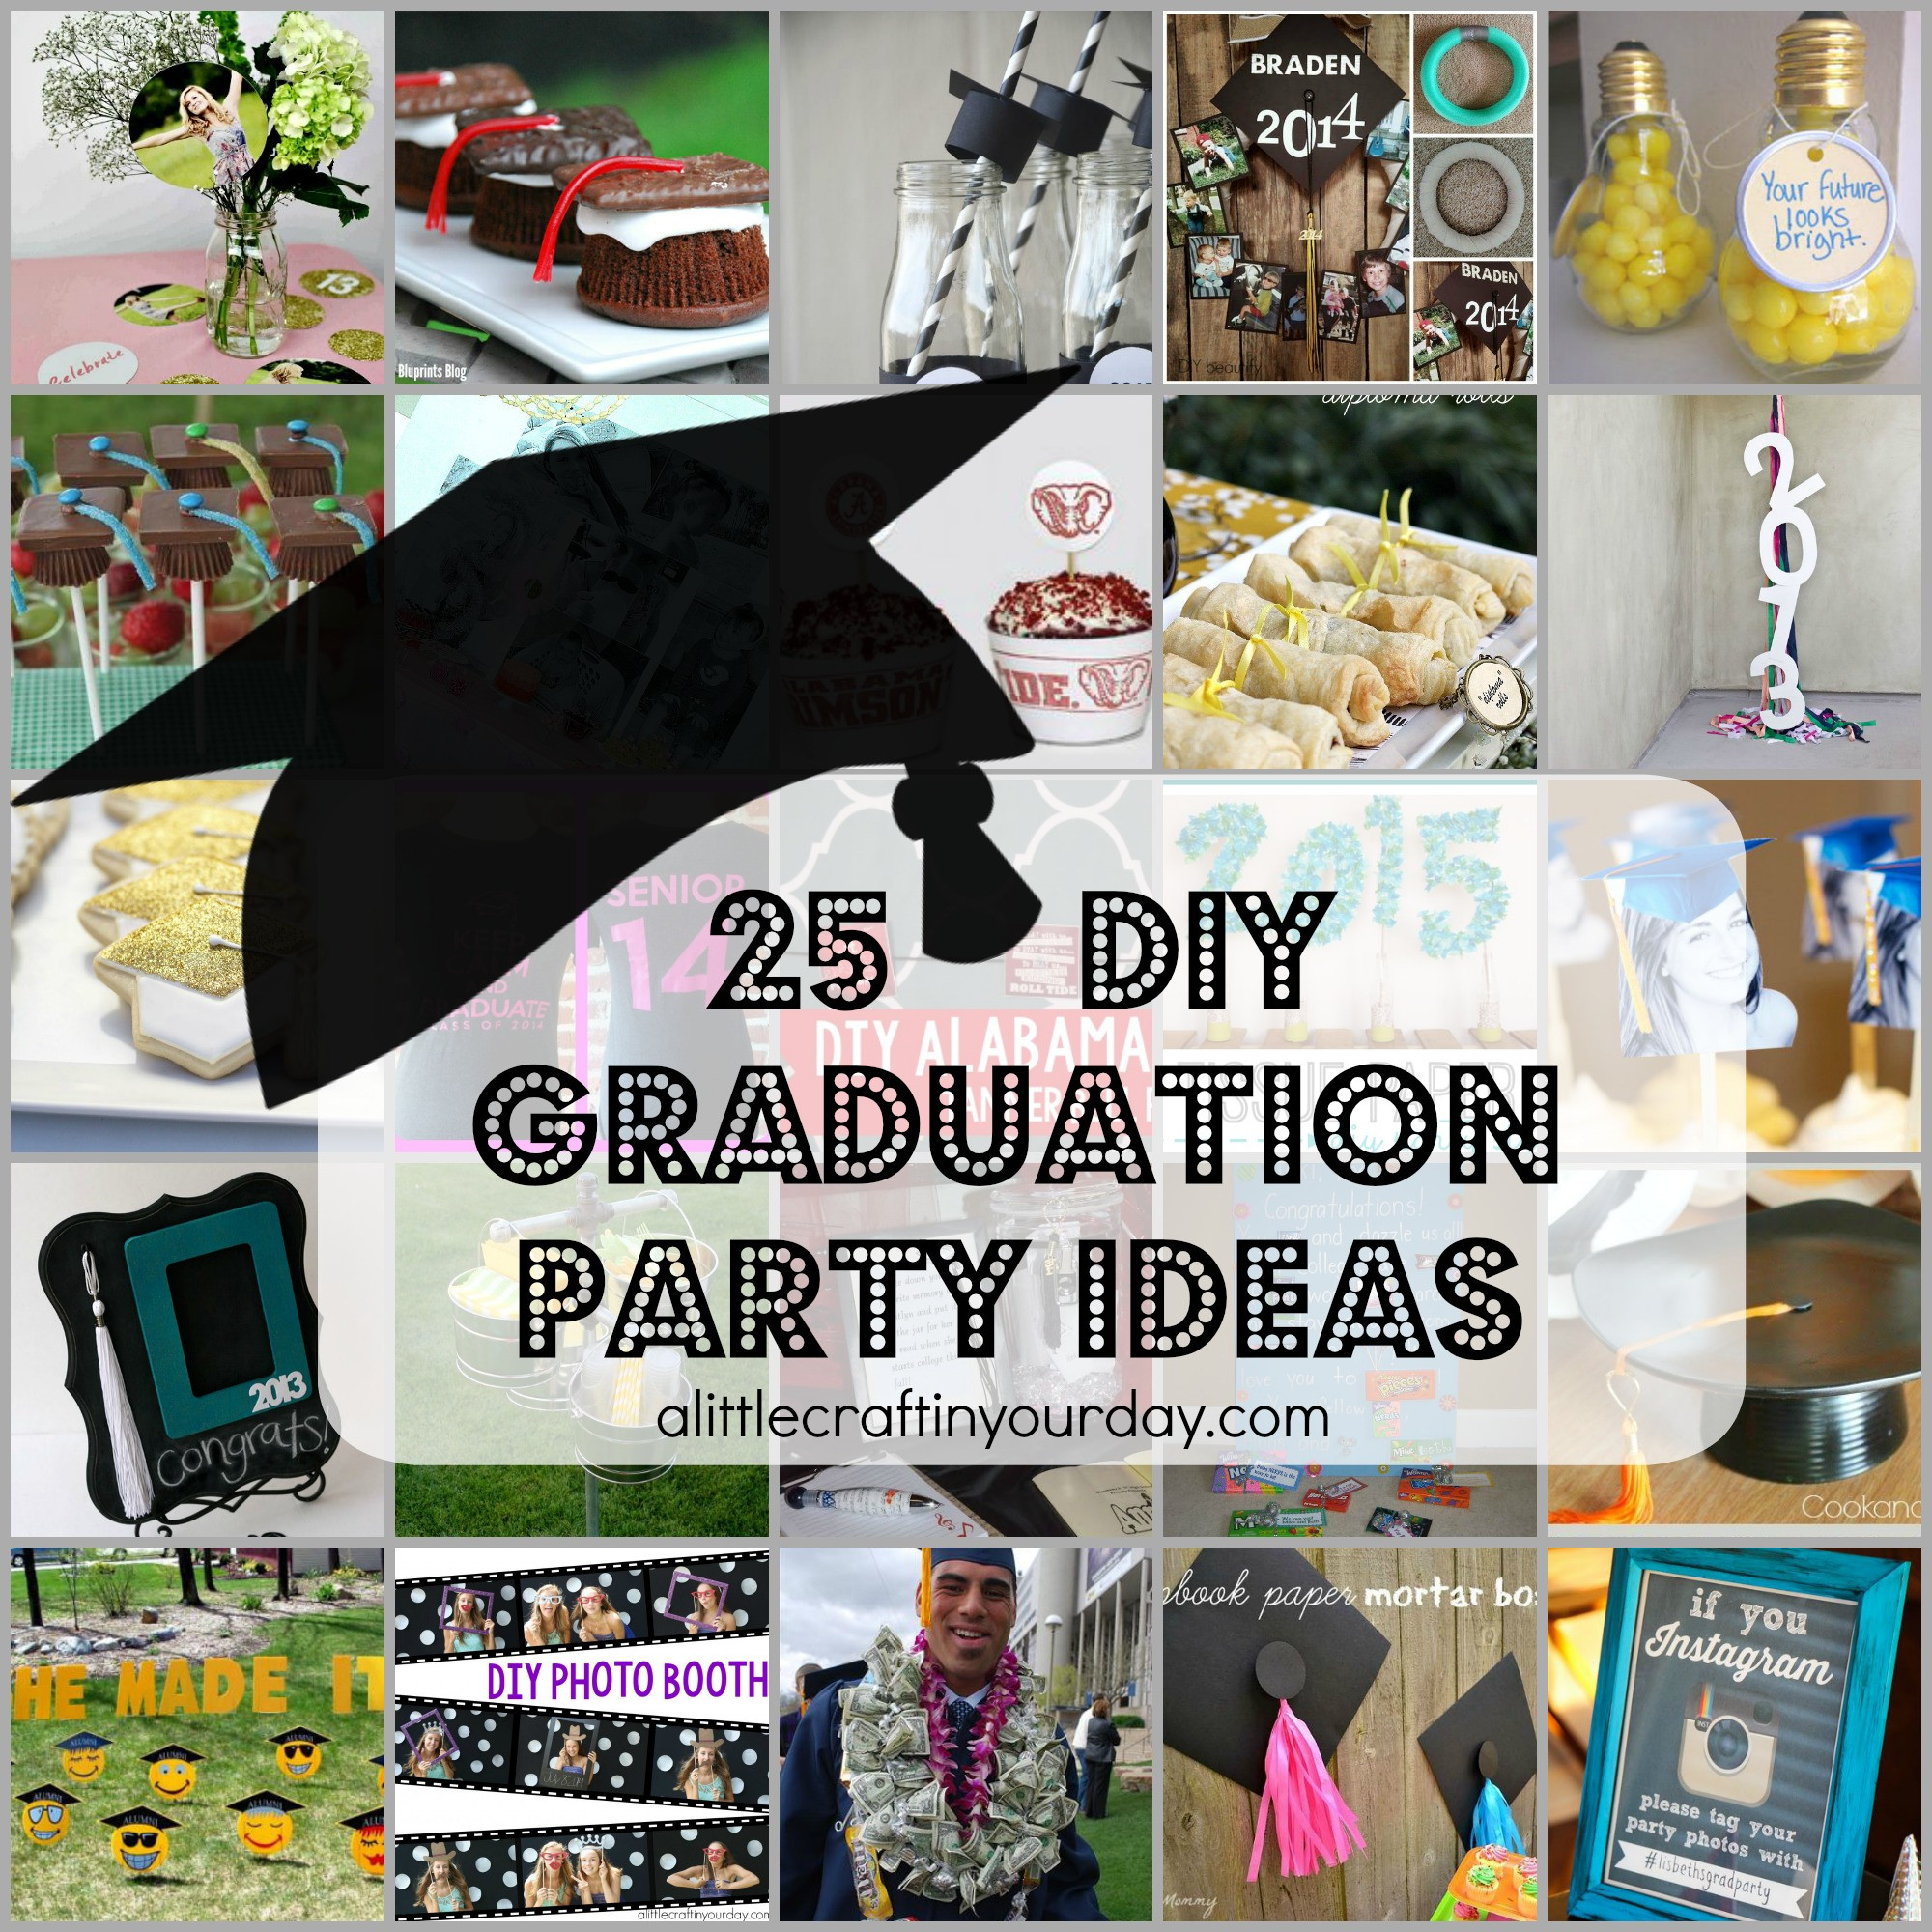 Creative Ideas For High School Graduation Party
 25 DIY Graduation Party Ideas A Little Craft In Your Day